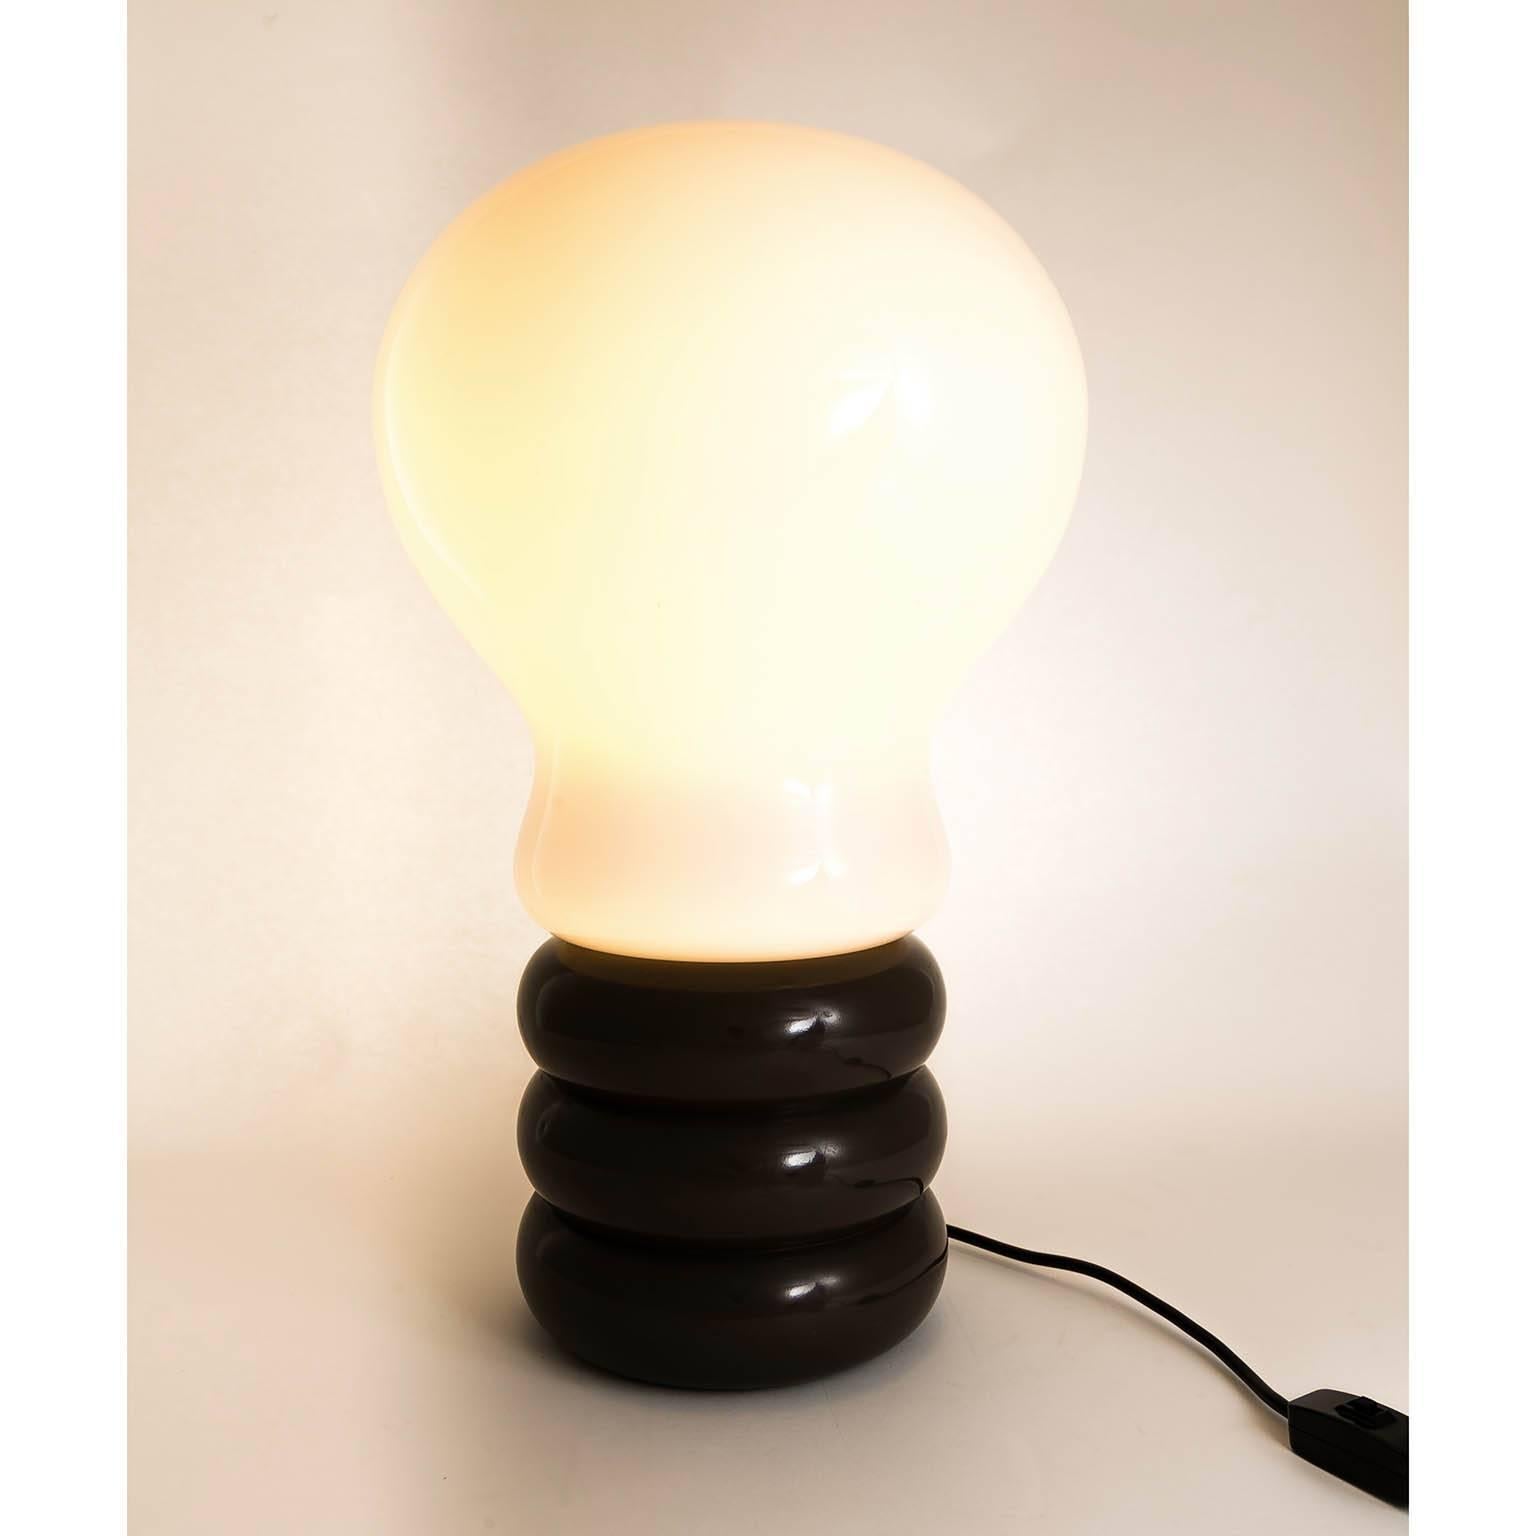 The bulb table lamp was designed by Ingo Maurer and produced by M-design in Munich in the 1970s. 
It is made of a dark brown metal stand and a blown opal glass lamp shade in the form of a bulb.
There is one socket for a medium or standard screw base